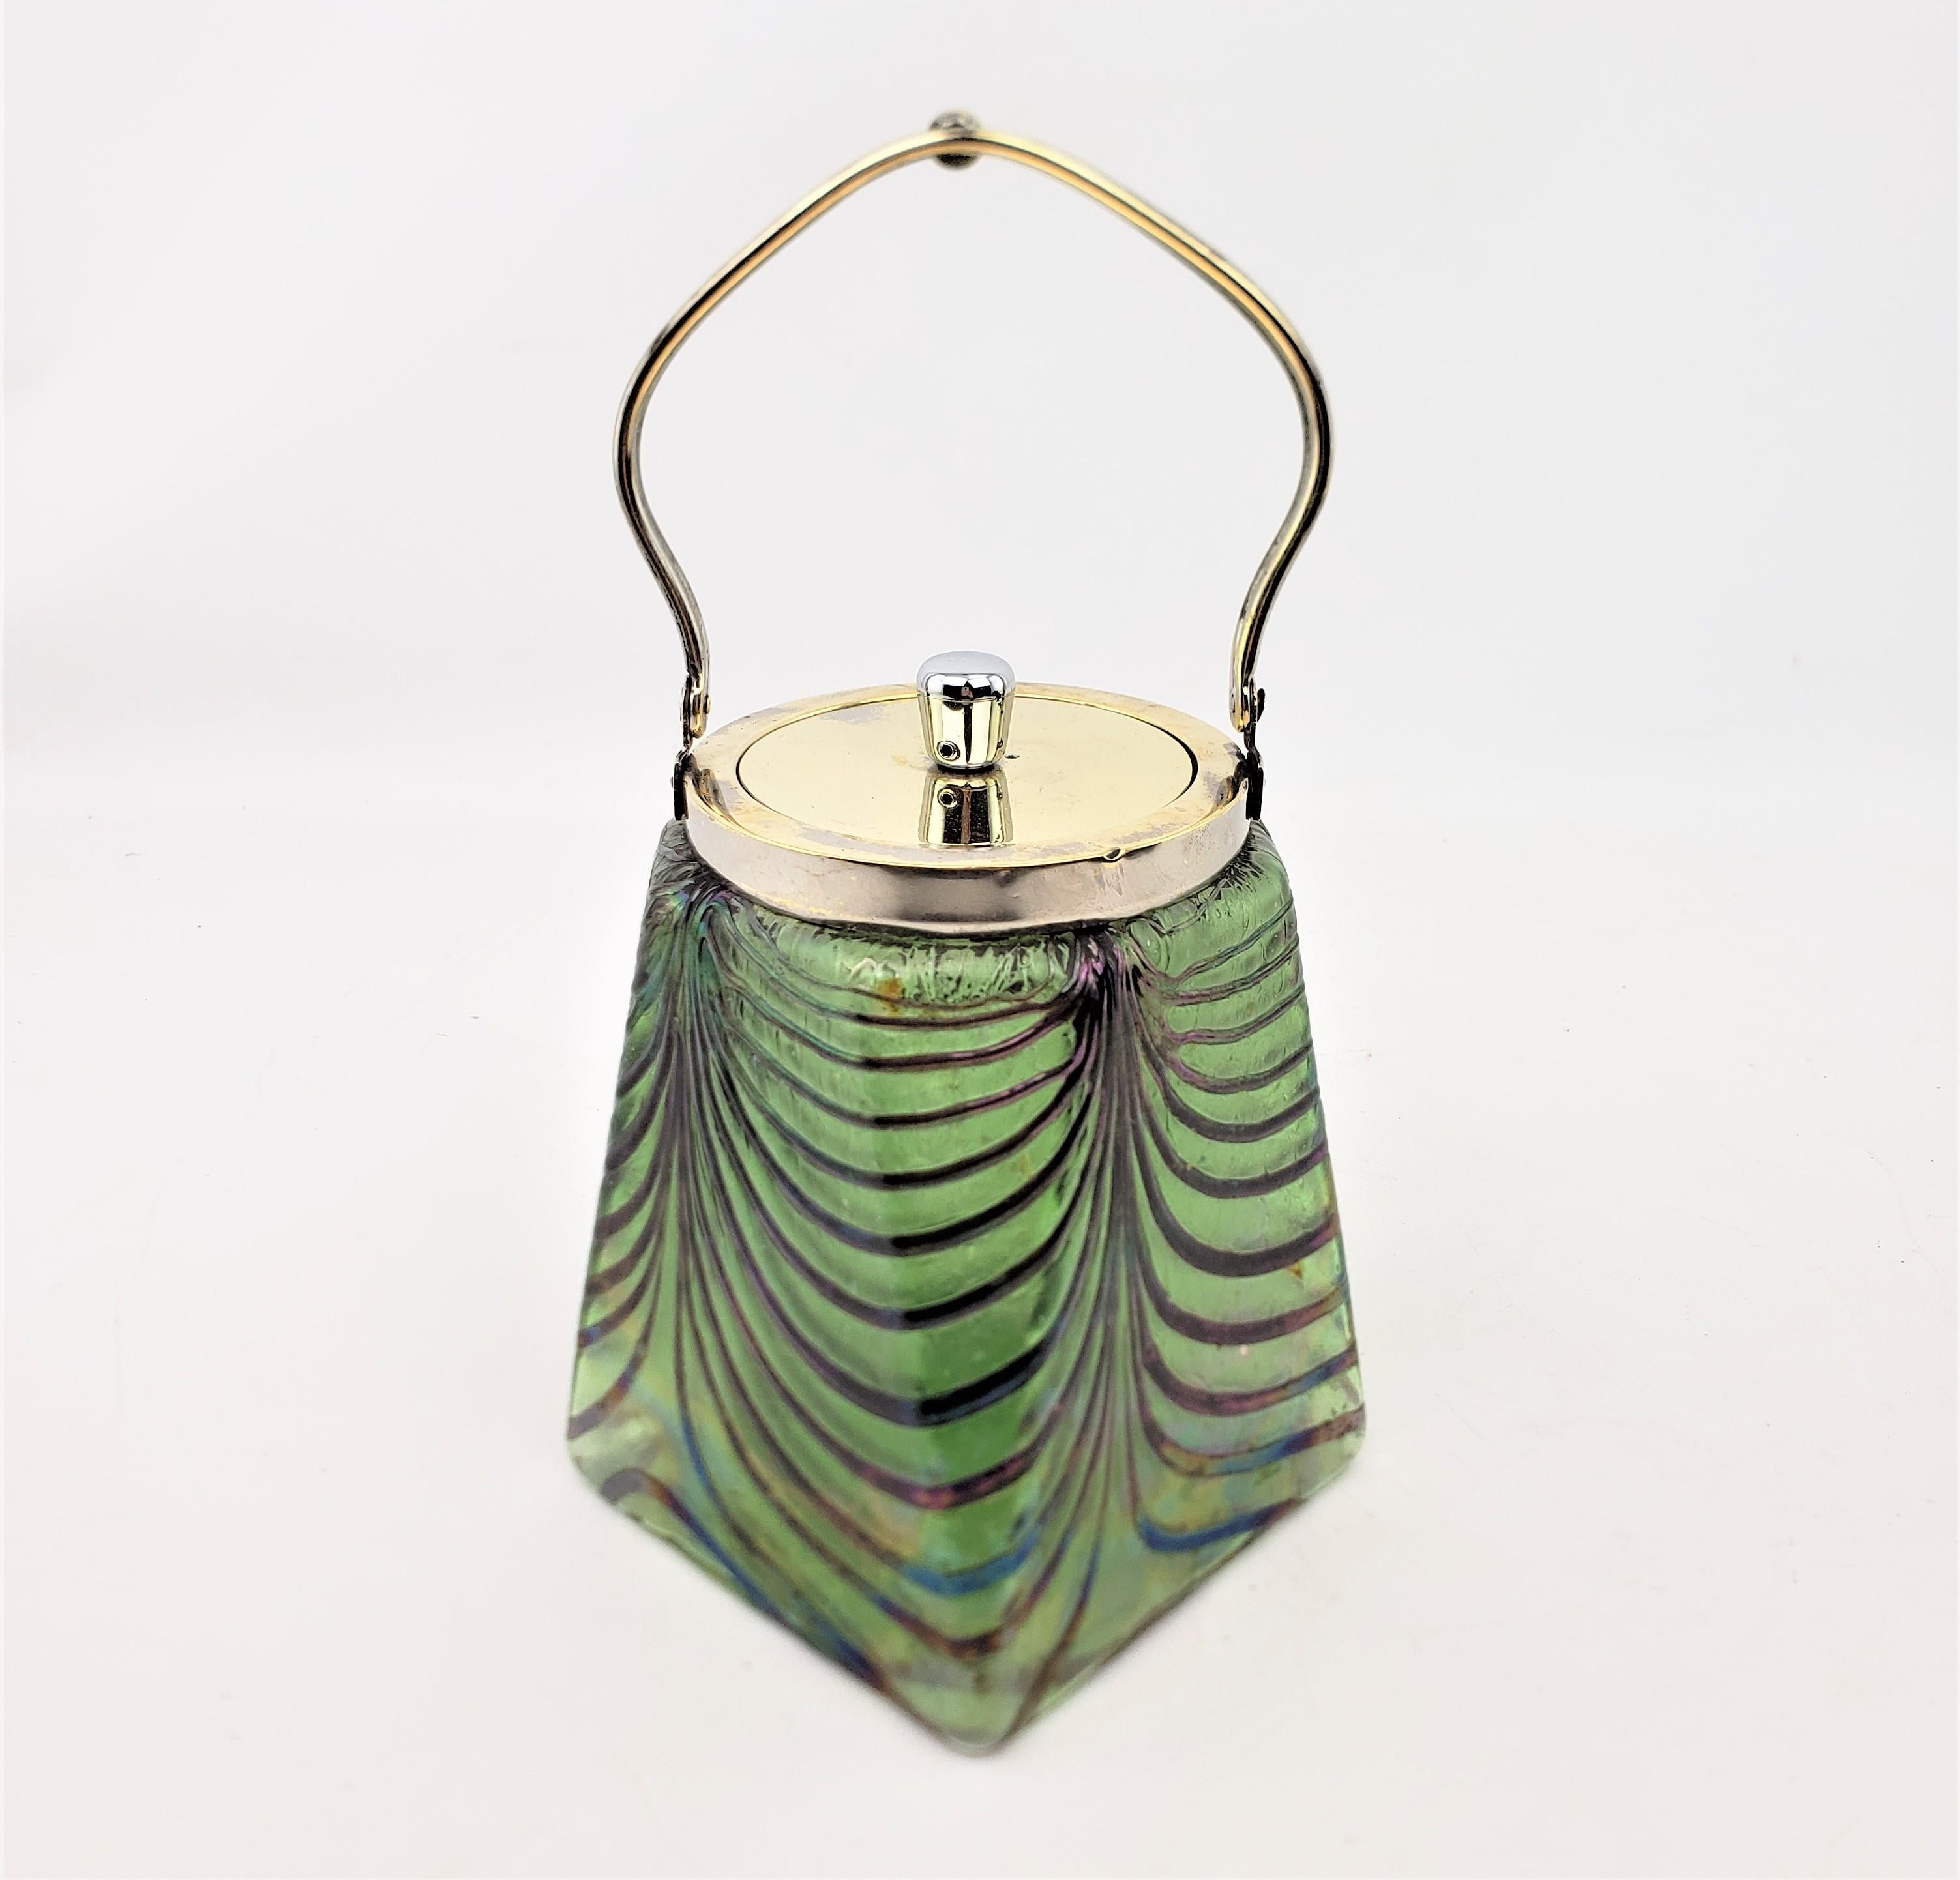 This antique art glass and silver plated biscuit barrel is unsigned, but presumed to have originated from Austria and done by one of the various contemporary art glass producers of Loetz and done in the period Edwardian style. The body of the